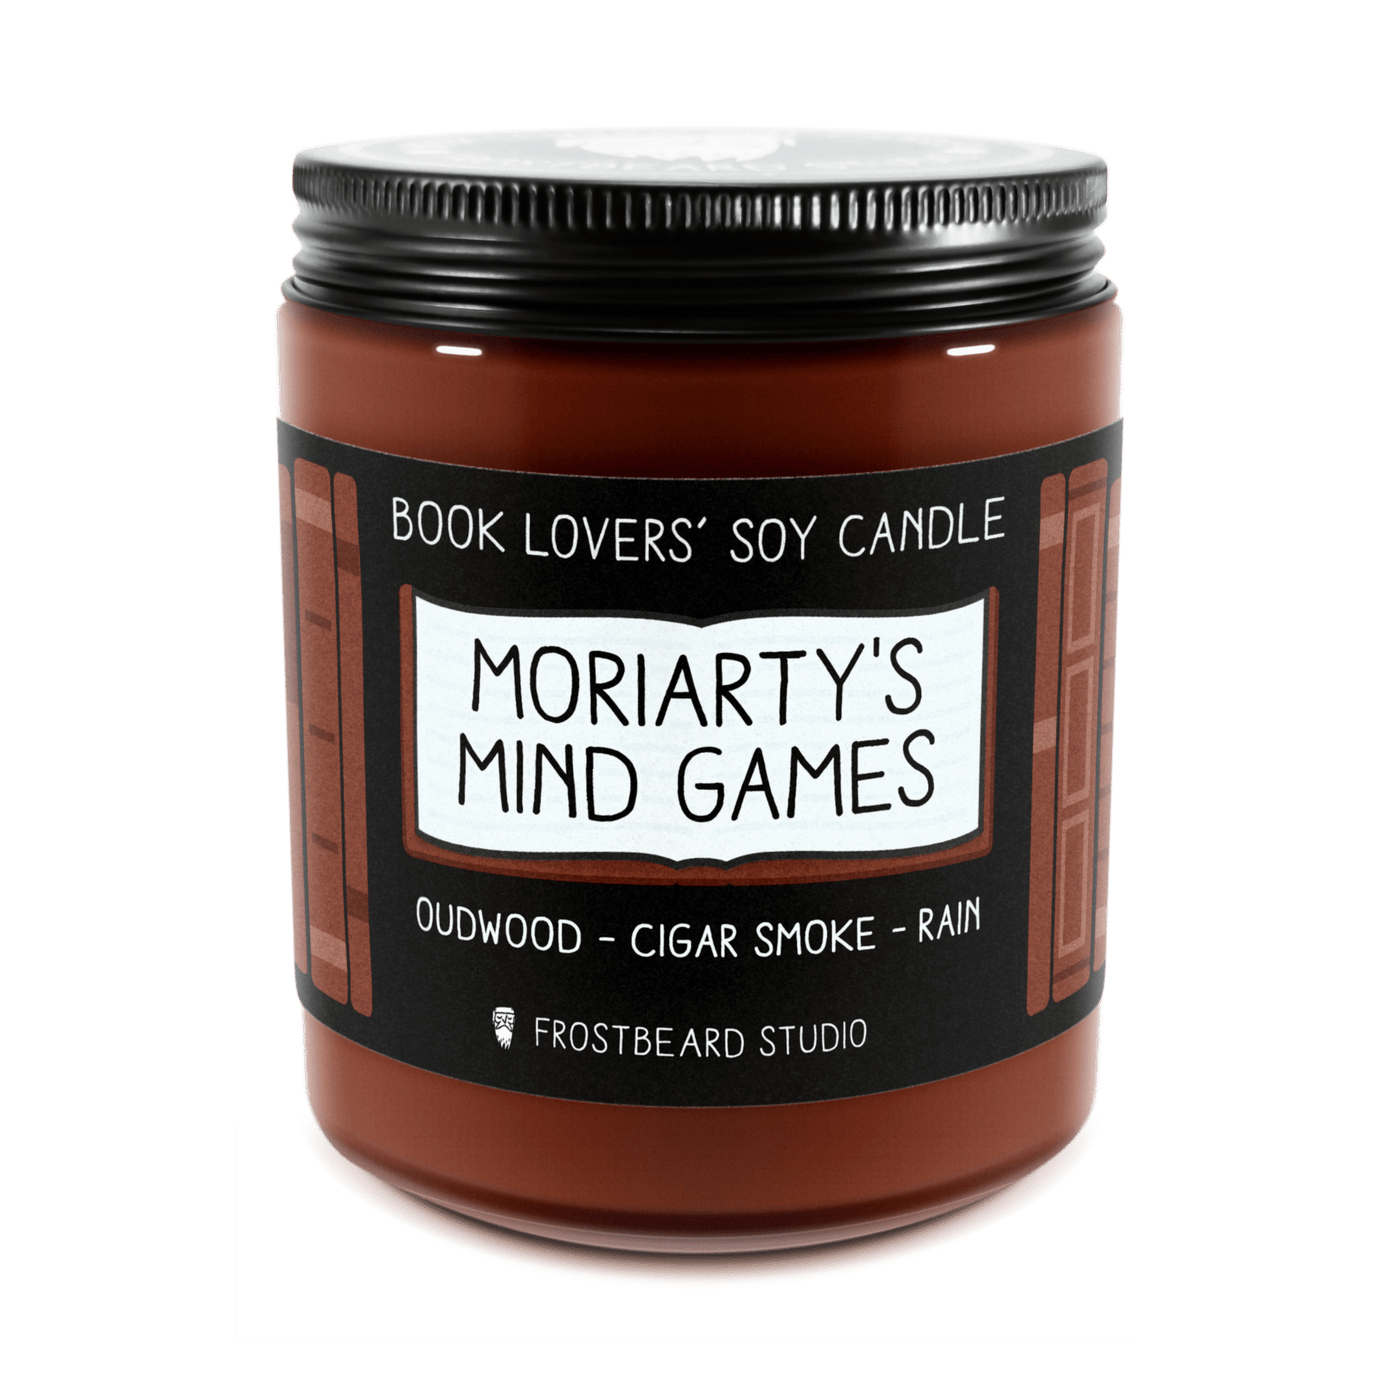 Moriarty's Mind Games - 8 oz Jar - Book Lovers' Soy Candle - Frostbeard Studio